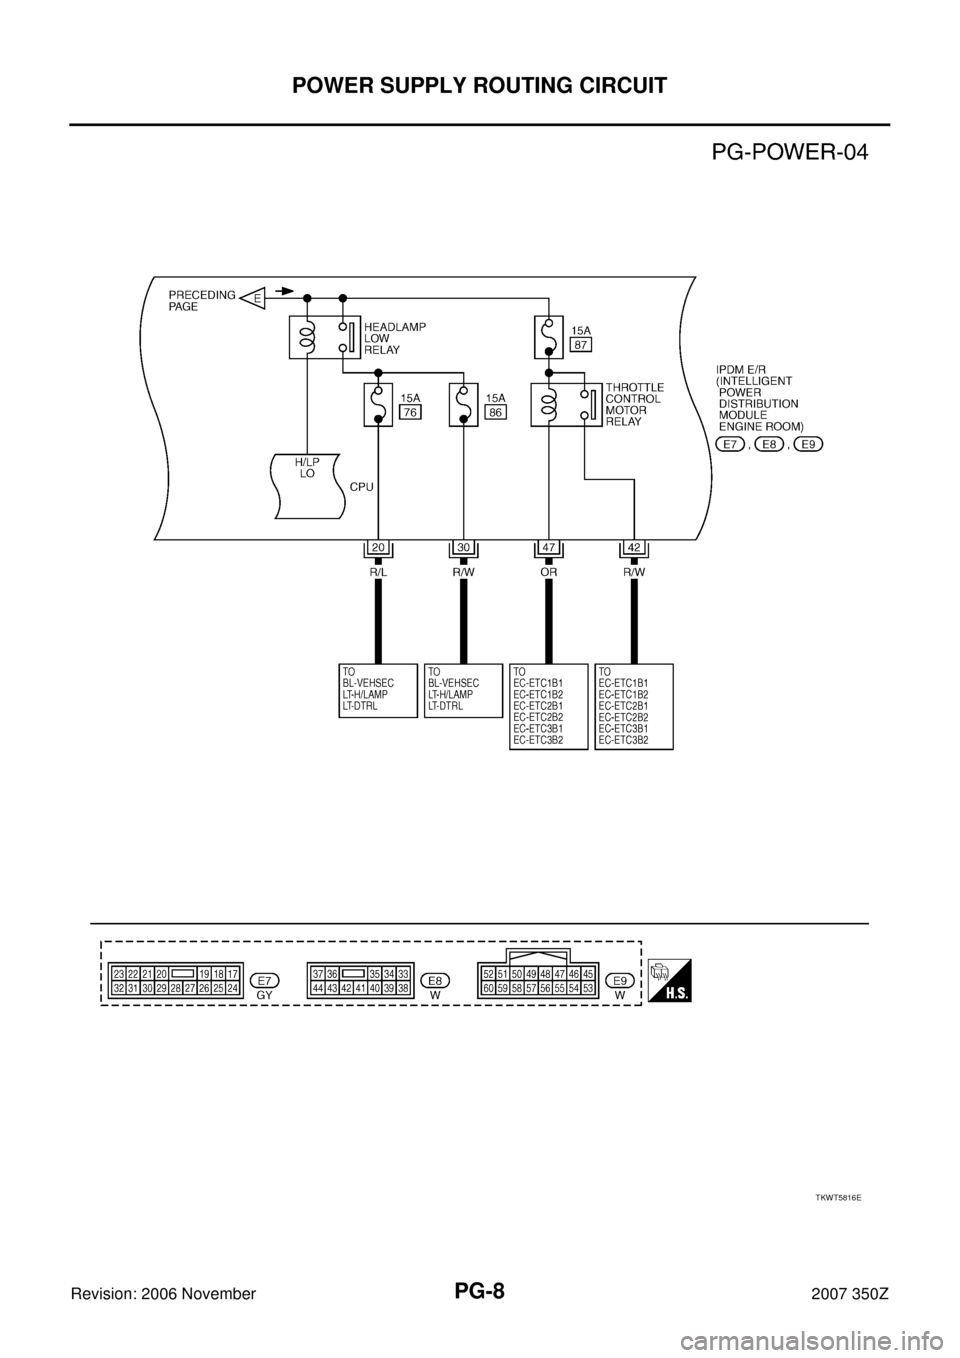 NISSAN 350Z 2007 Z33 Power Supply, Ground And Circuit Workshop Manual PG-8
POWER SUPPLY ROUTING CIRCUIT
Revision: 2006 November2007 350Z
TKWT5816E 